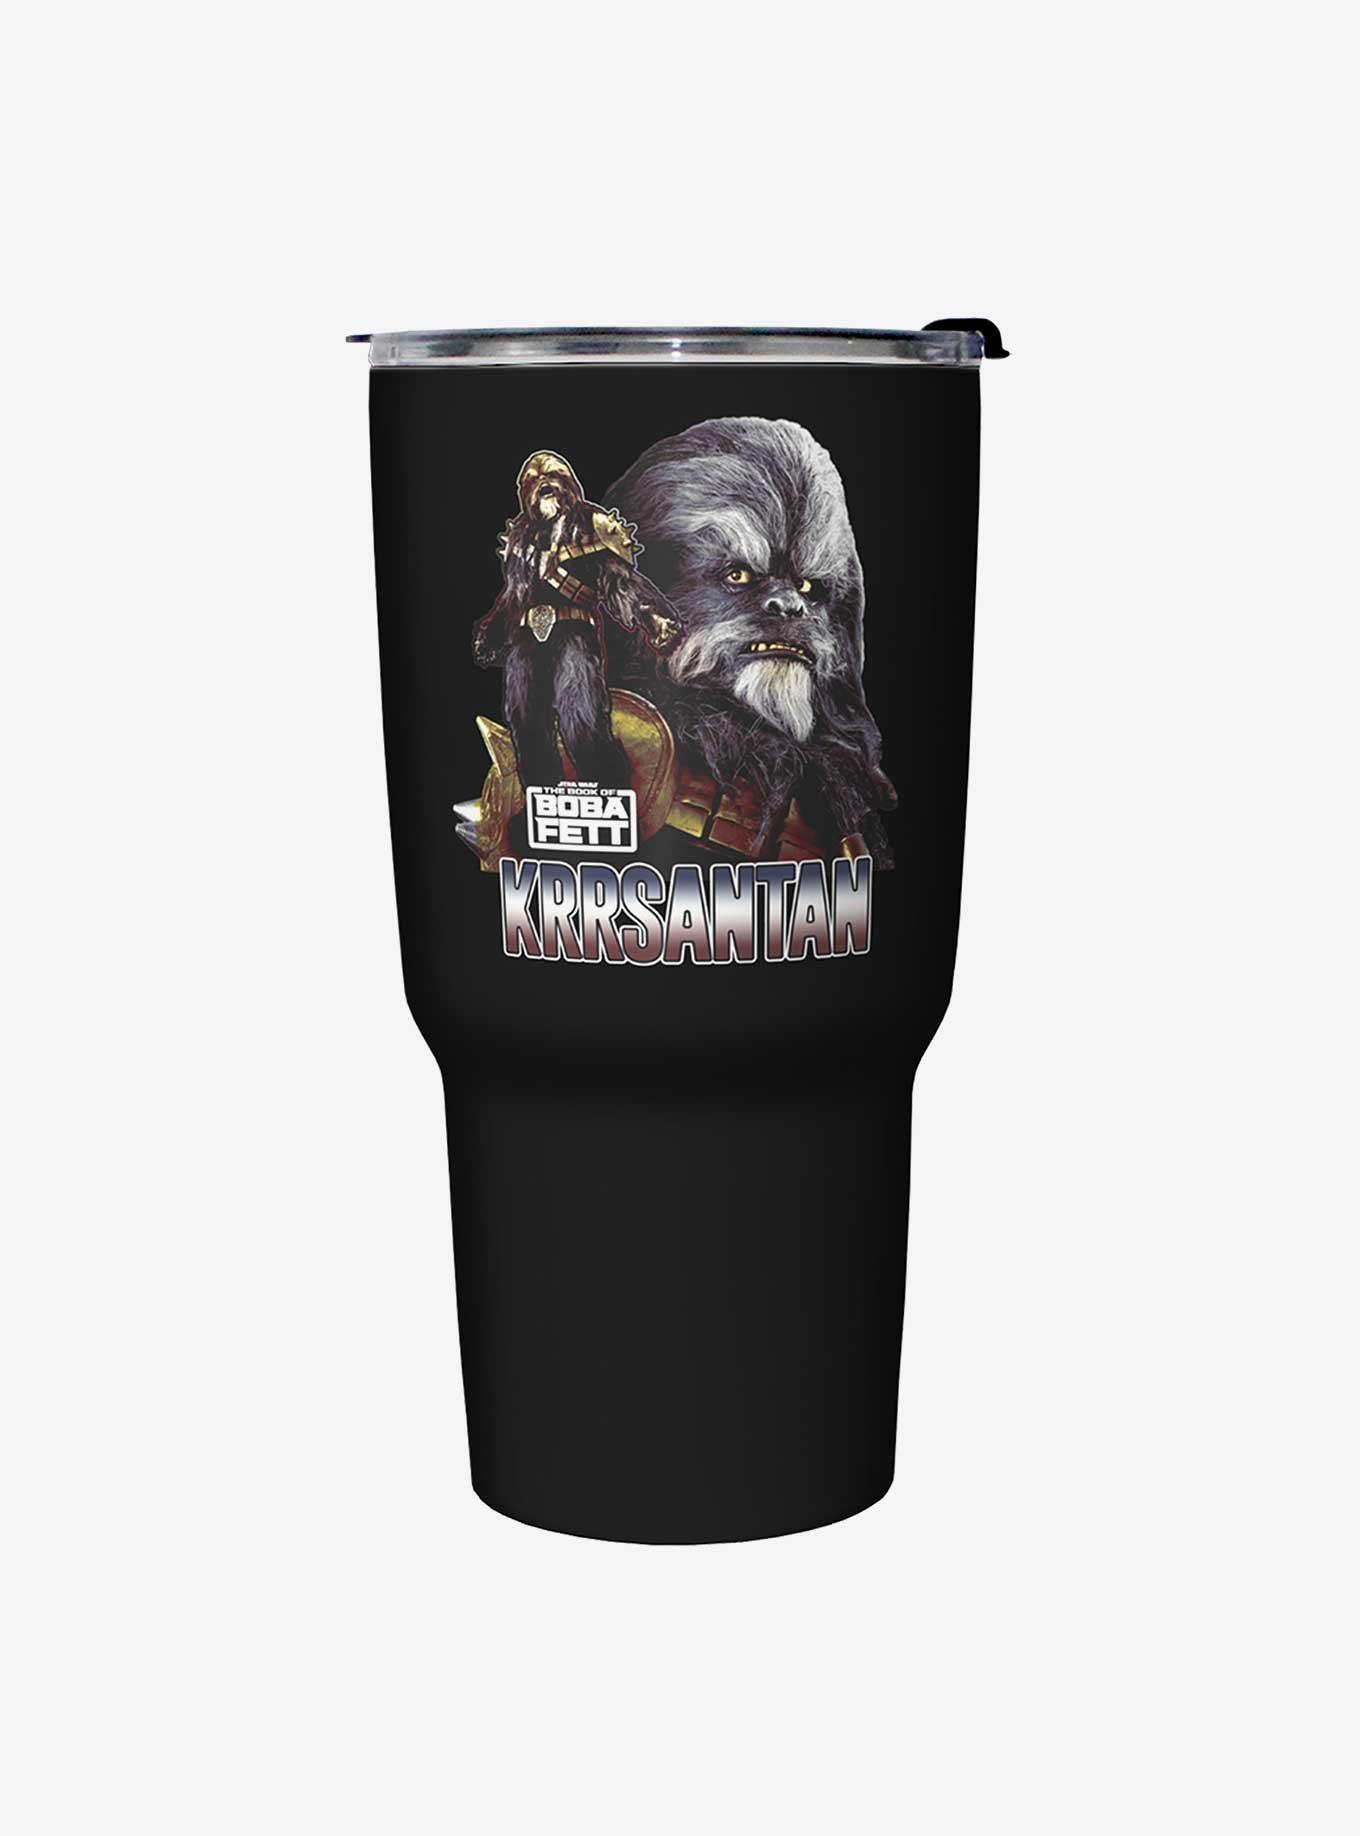 Star Wars The Book of Boba Fett Questions Later Black Stainless Steel Travel Mug